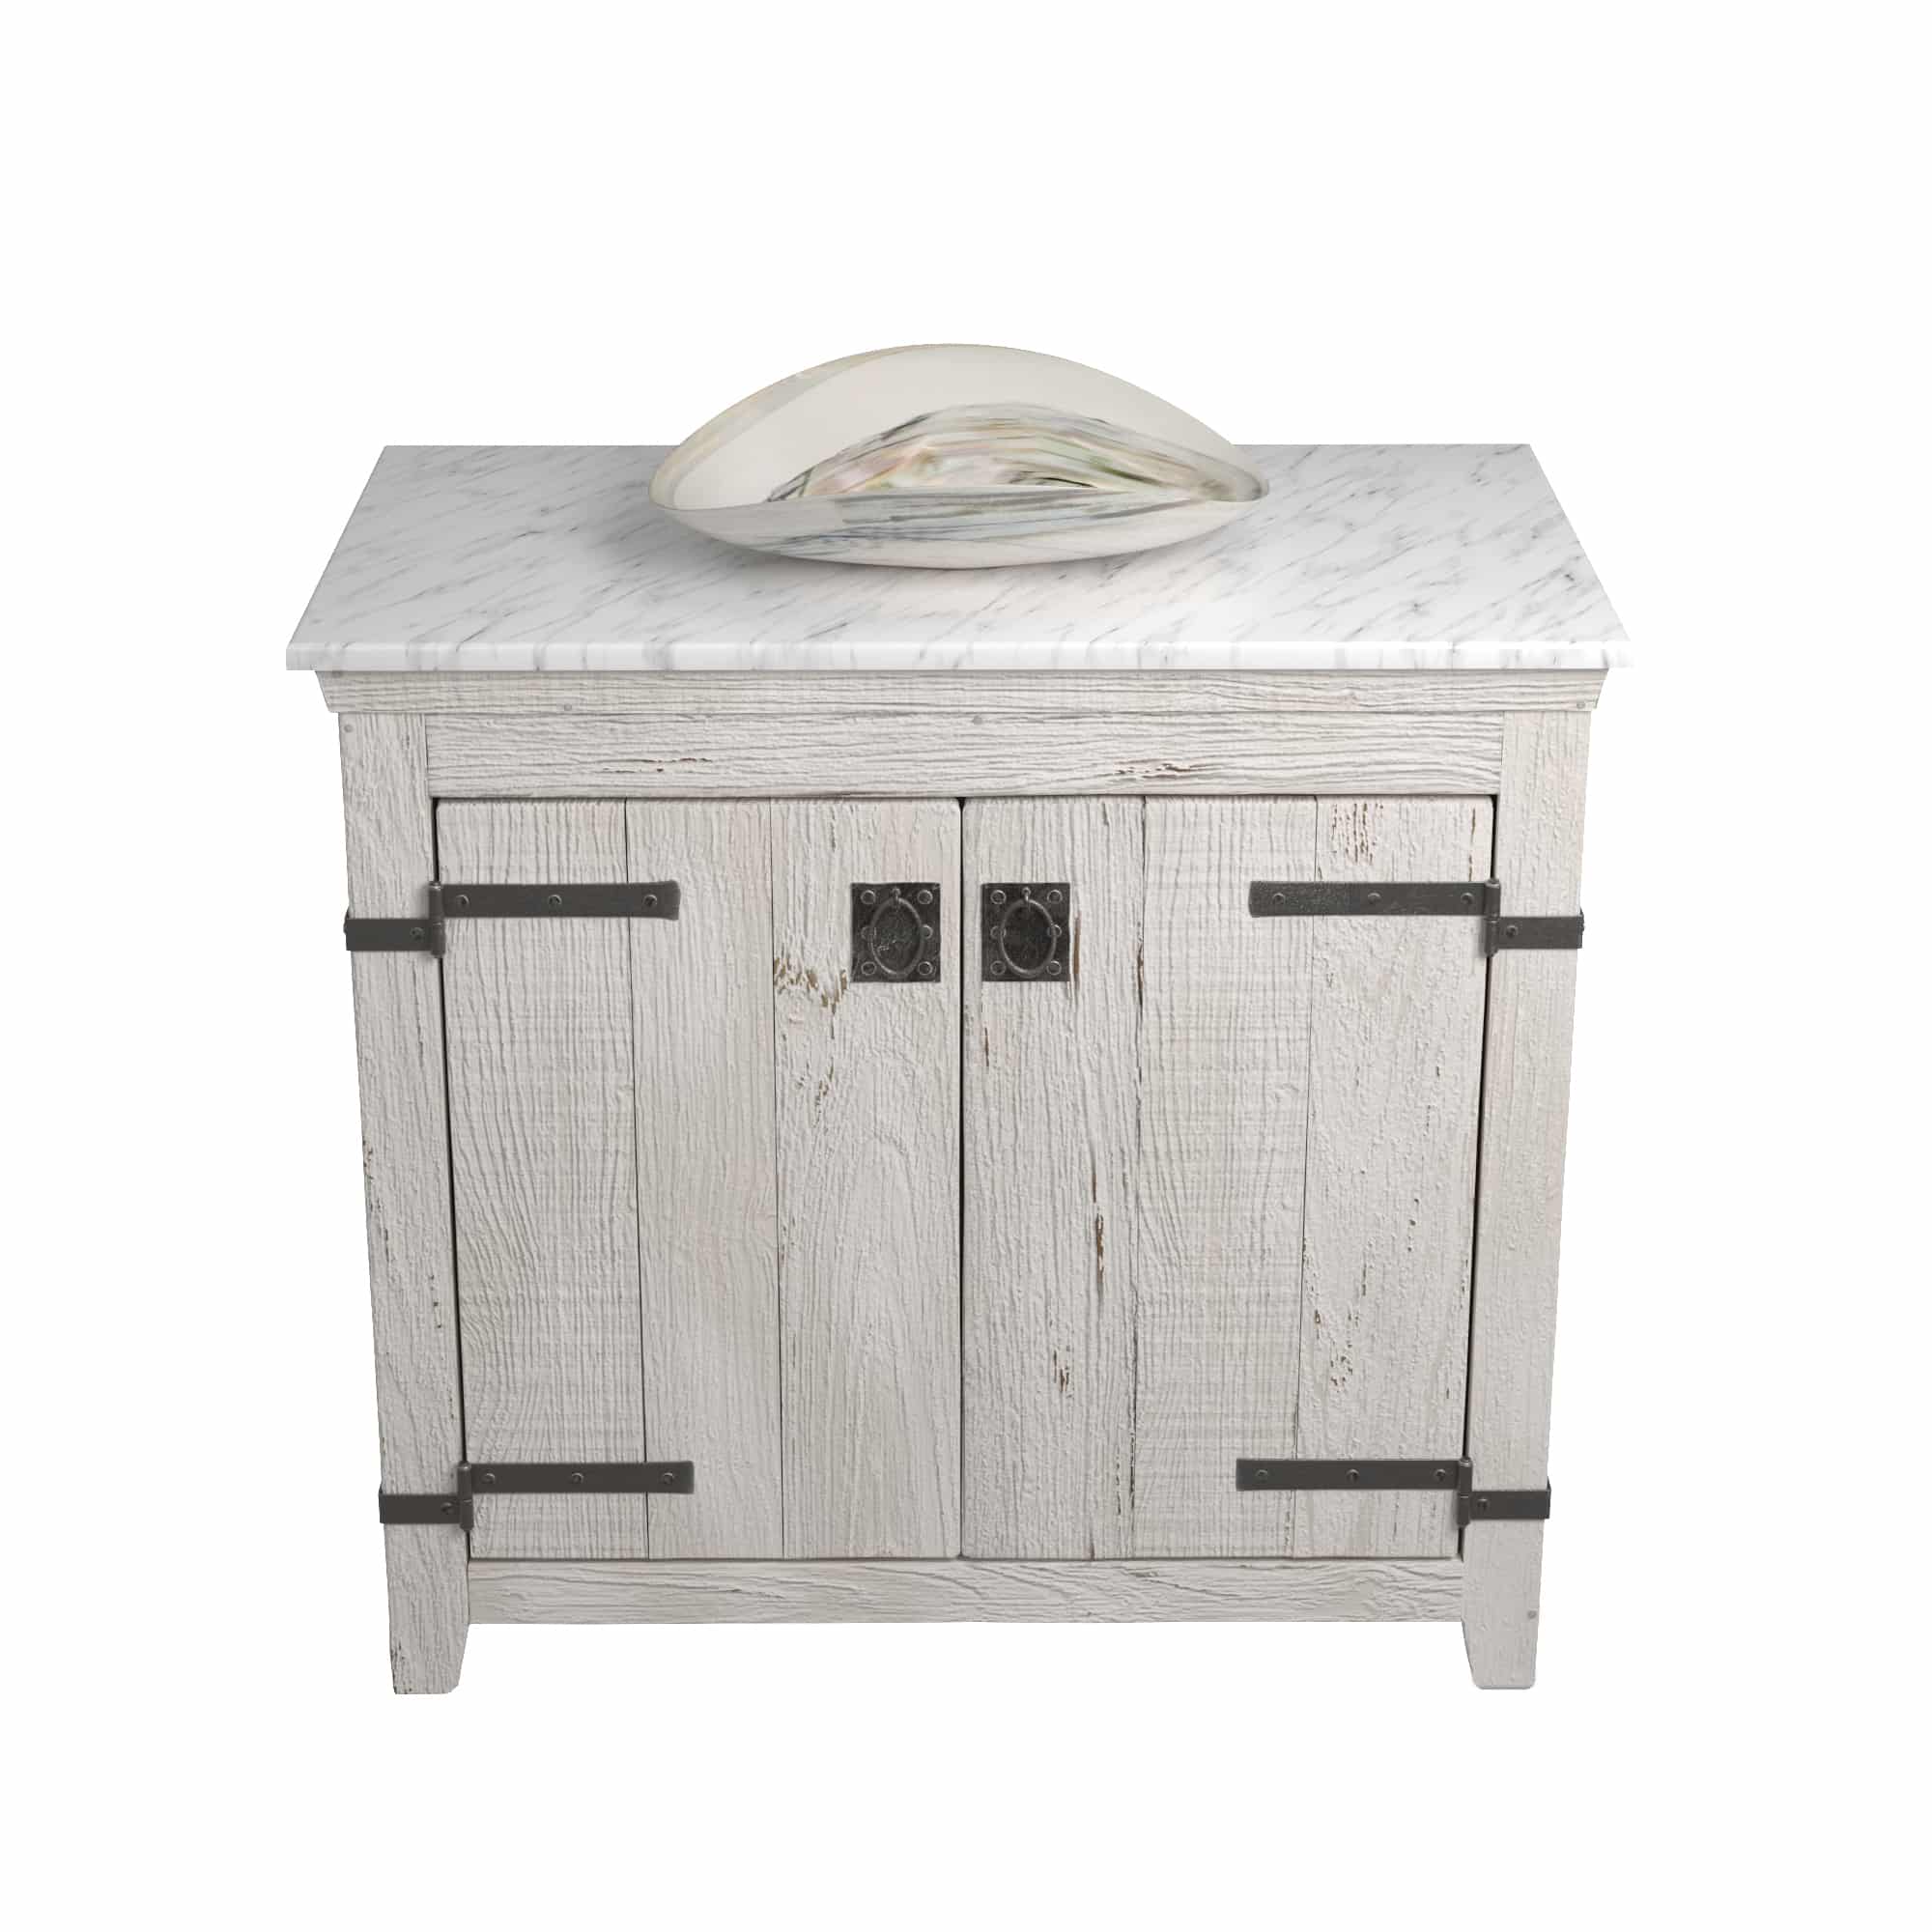 Native Trails 36" Americana Vanity in Whitewash with Carrara Marble Top and Sorrento in Abalone, No Faucet Hole, BND36-VB-CT-MG-090